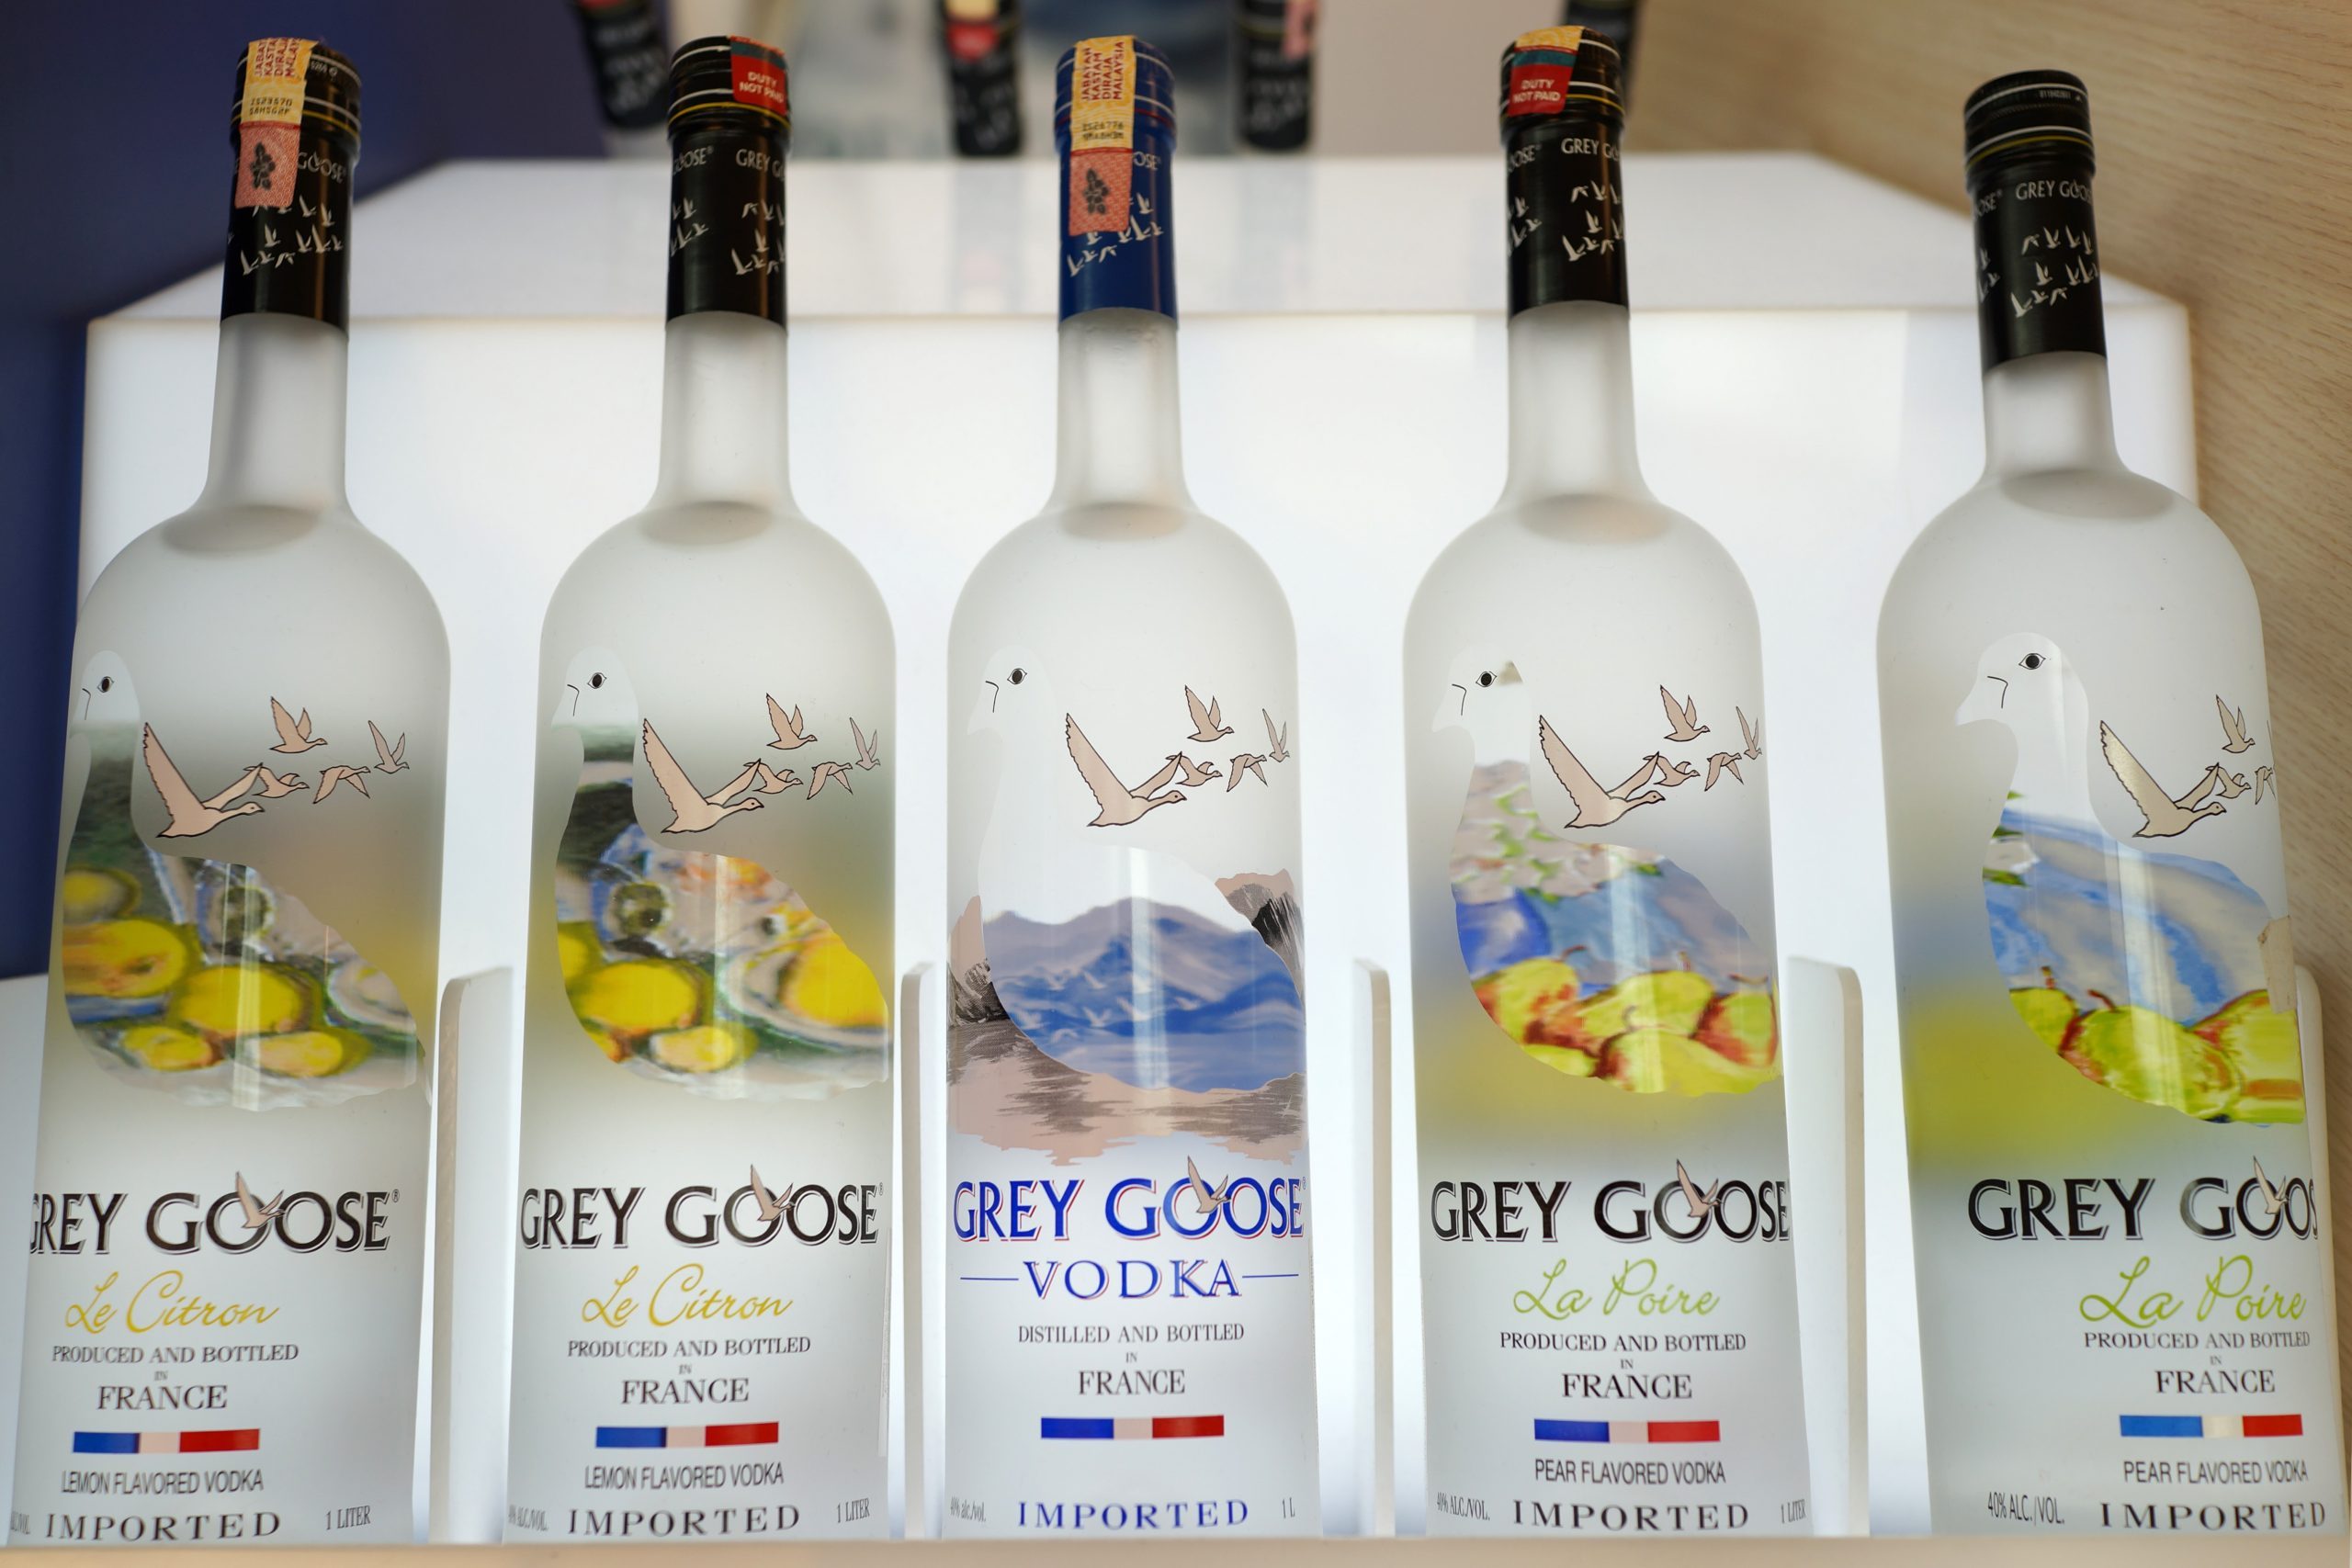 <p>According to Duty-Free Addict, a free travel club helping duty-free shoppers find the best deals on all kinds of products from liquor to jewelry, Grey Goose is:</p> <ul> <li>Cheaper in Japan than Australia</li> <li class="">More expensive in the Singapore Changi Airport duty-free than at the Dubai Airport duty-free</li> </ul>